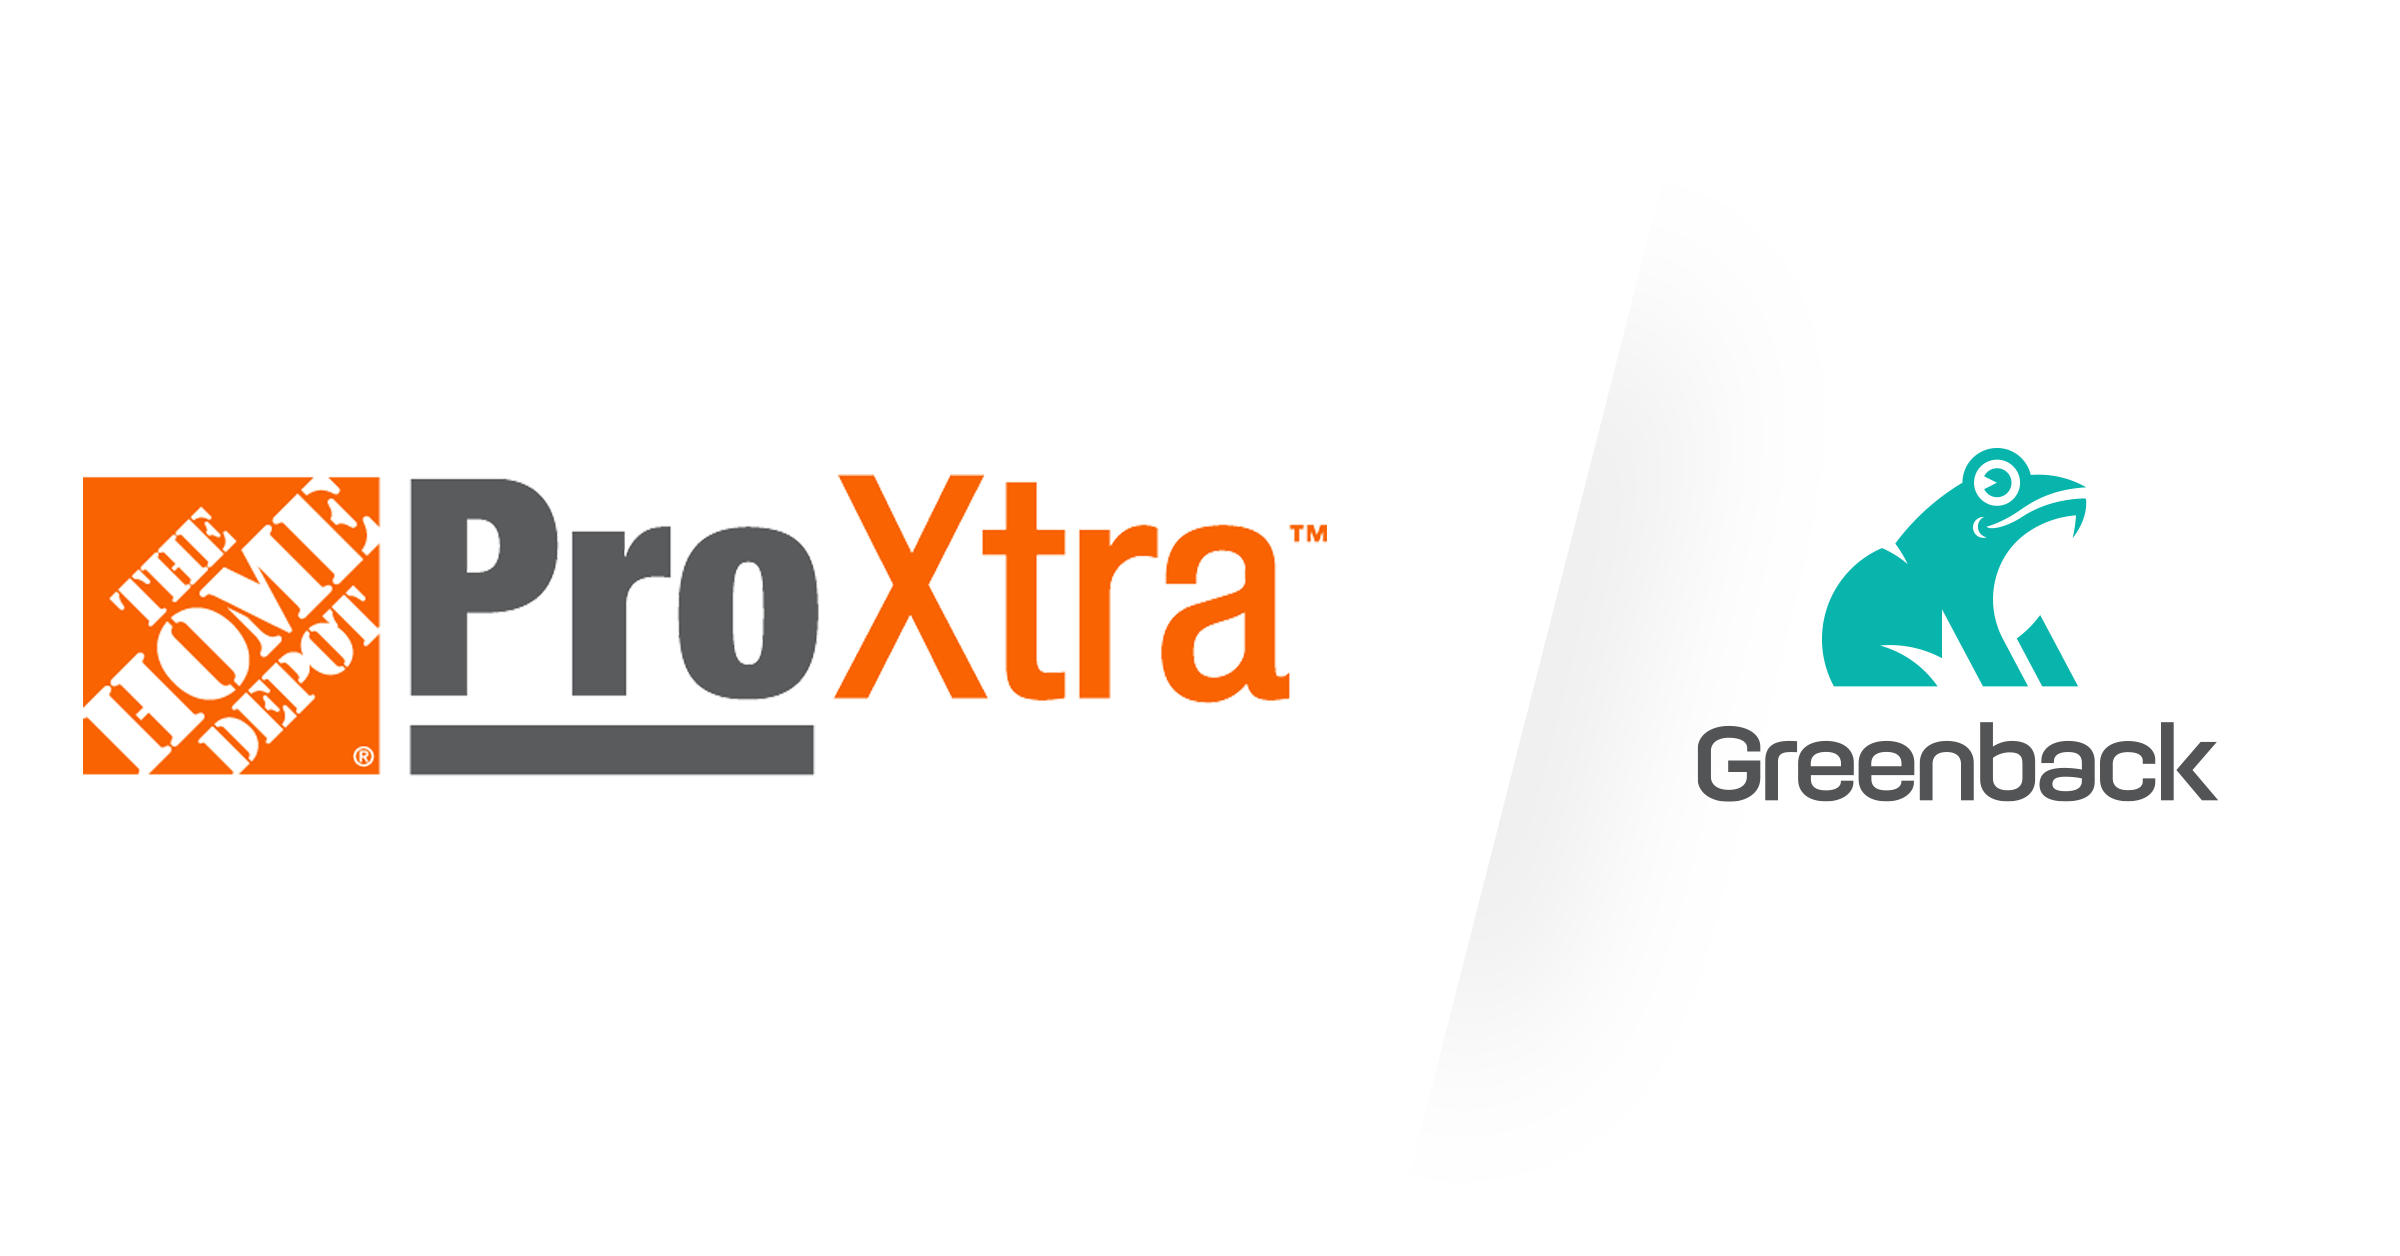 Automate Home Depot Pro Xtra Receipts